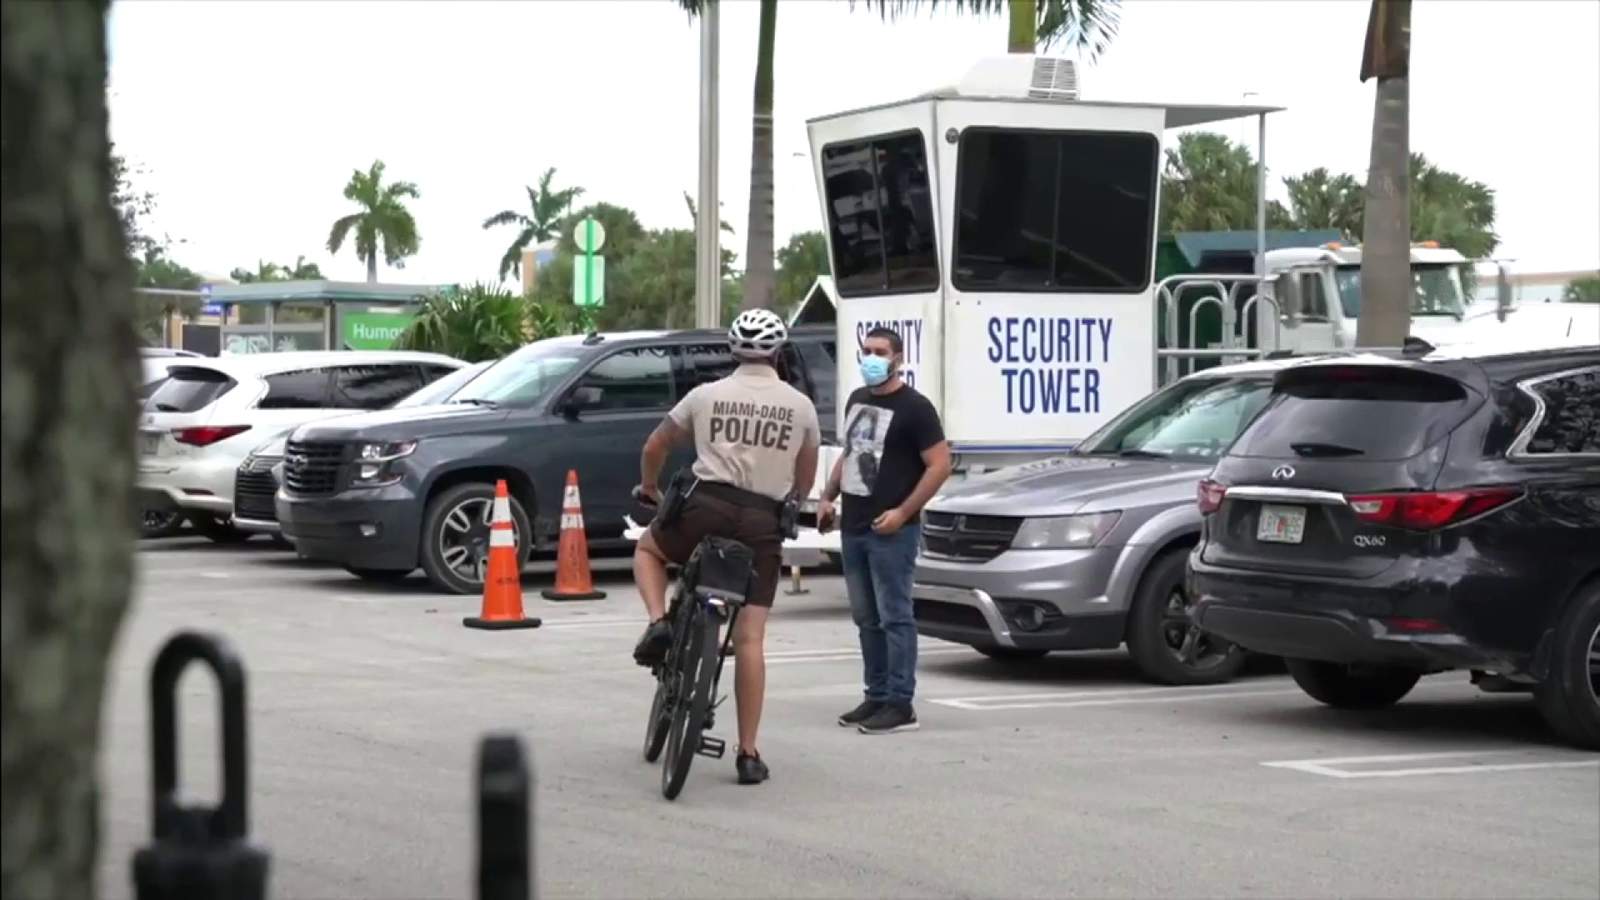 Miami-Dade Police Department ready to combat crime during holiday season